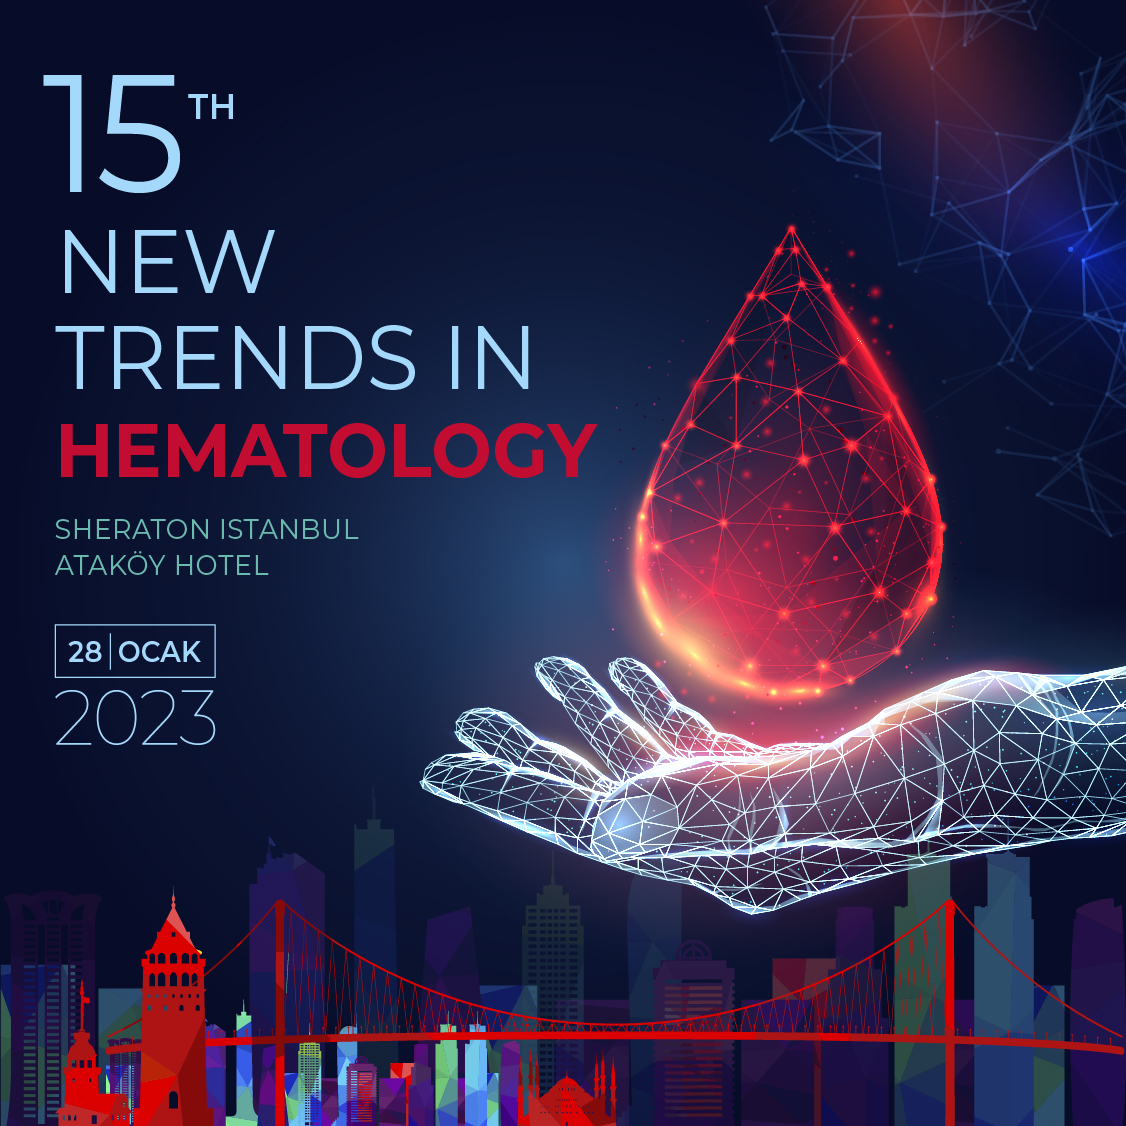 15th NEW TRENDS IN HEMATOLOGY